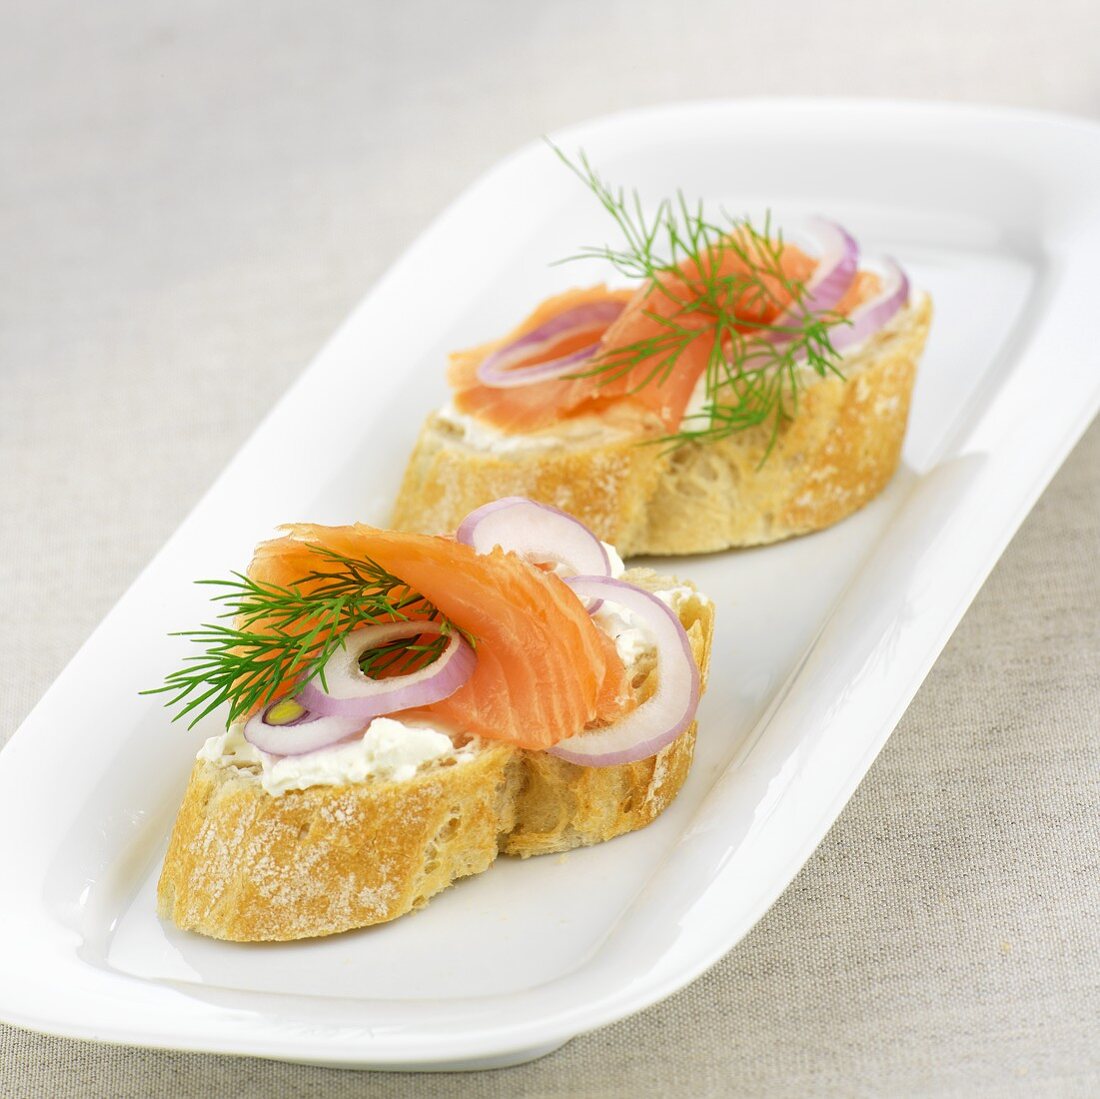 Baguette slices topped with smoked salmon, onions and dill